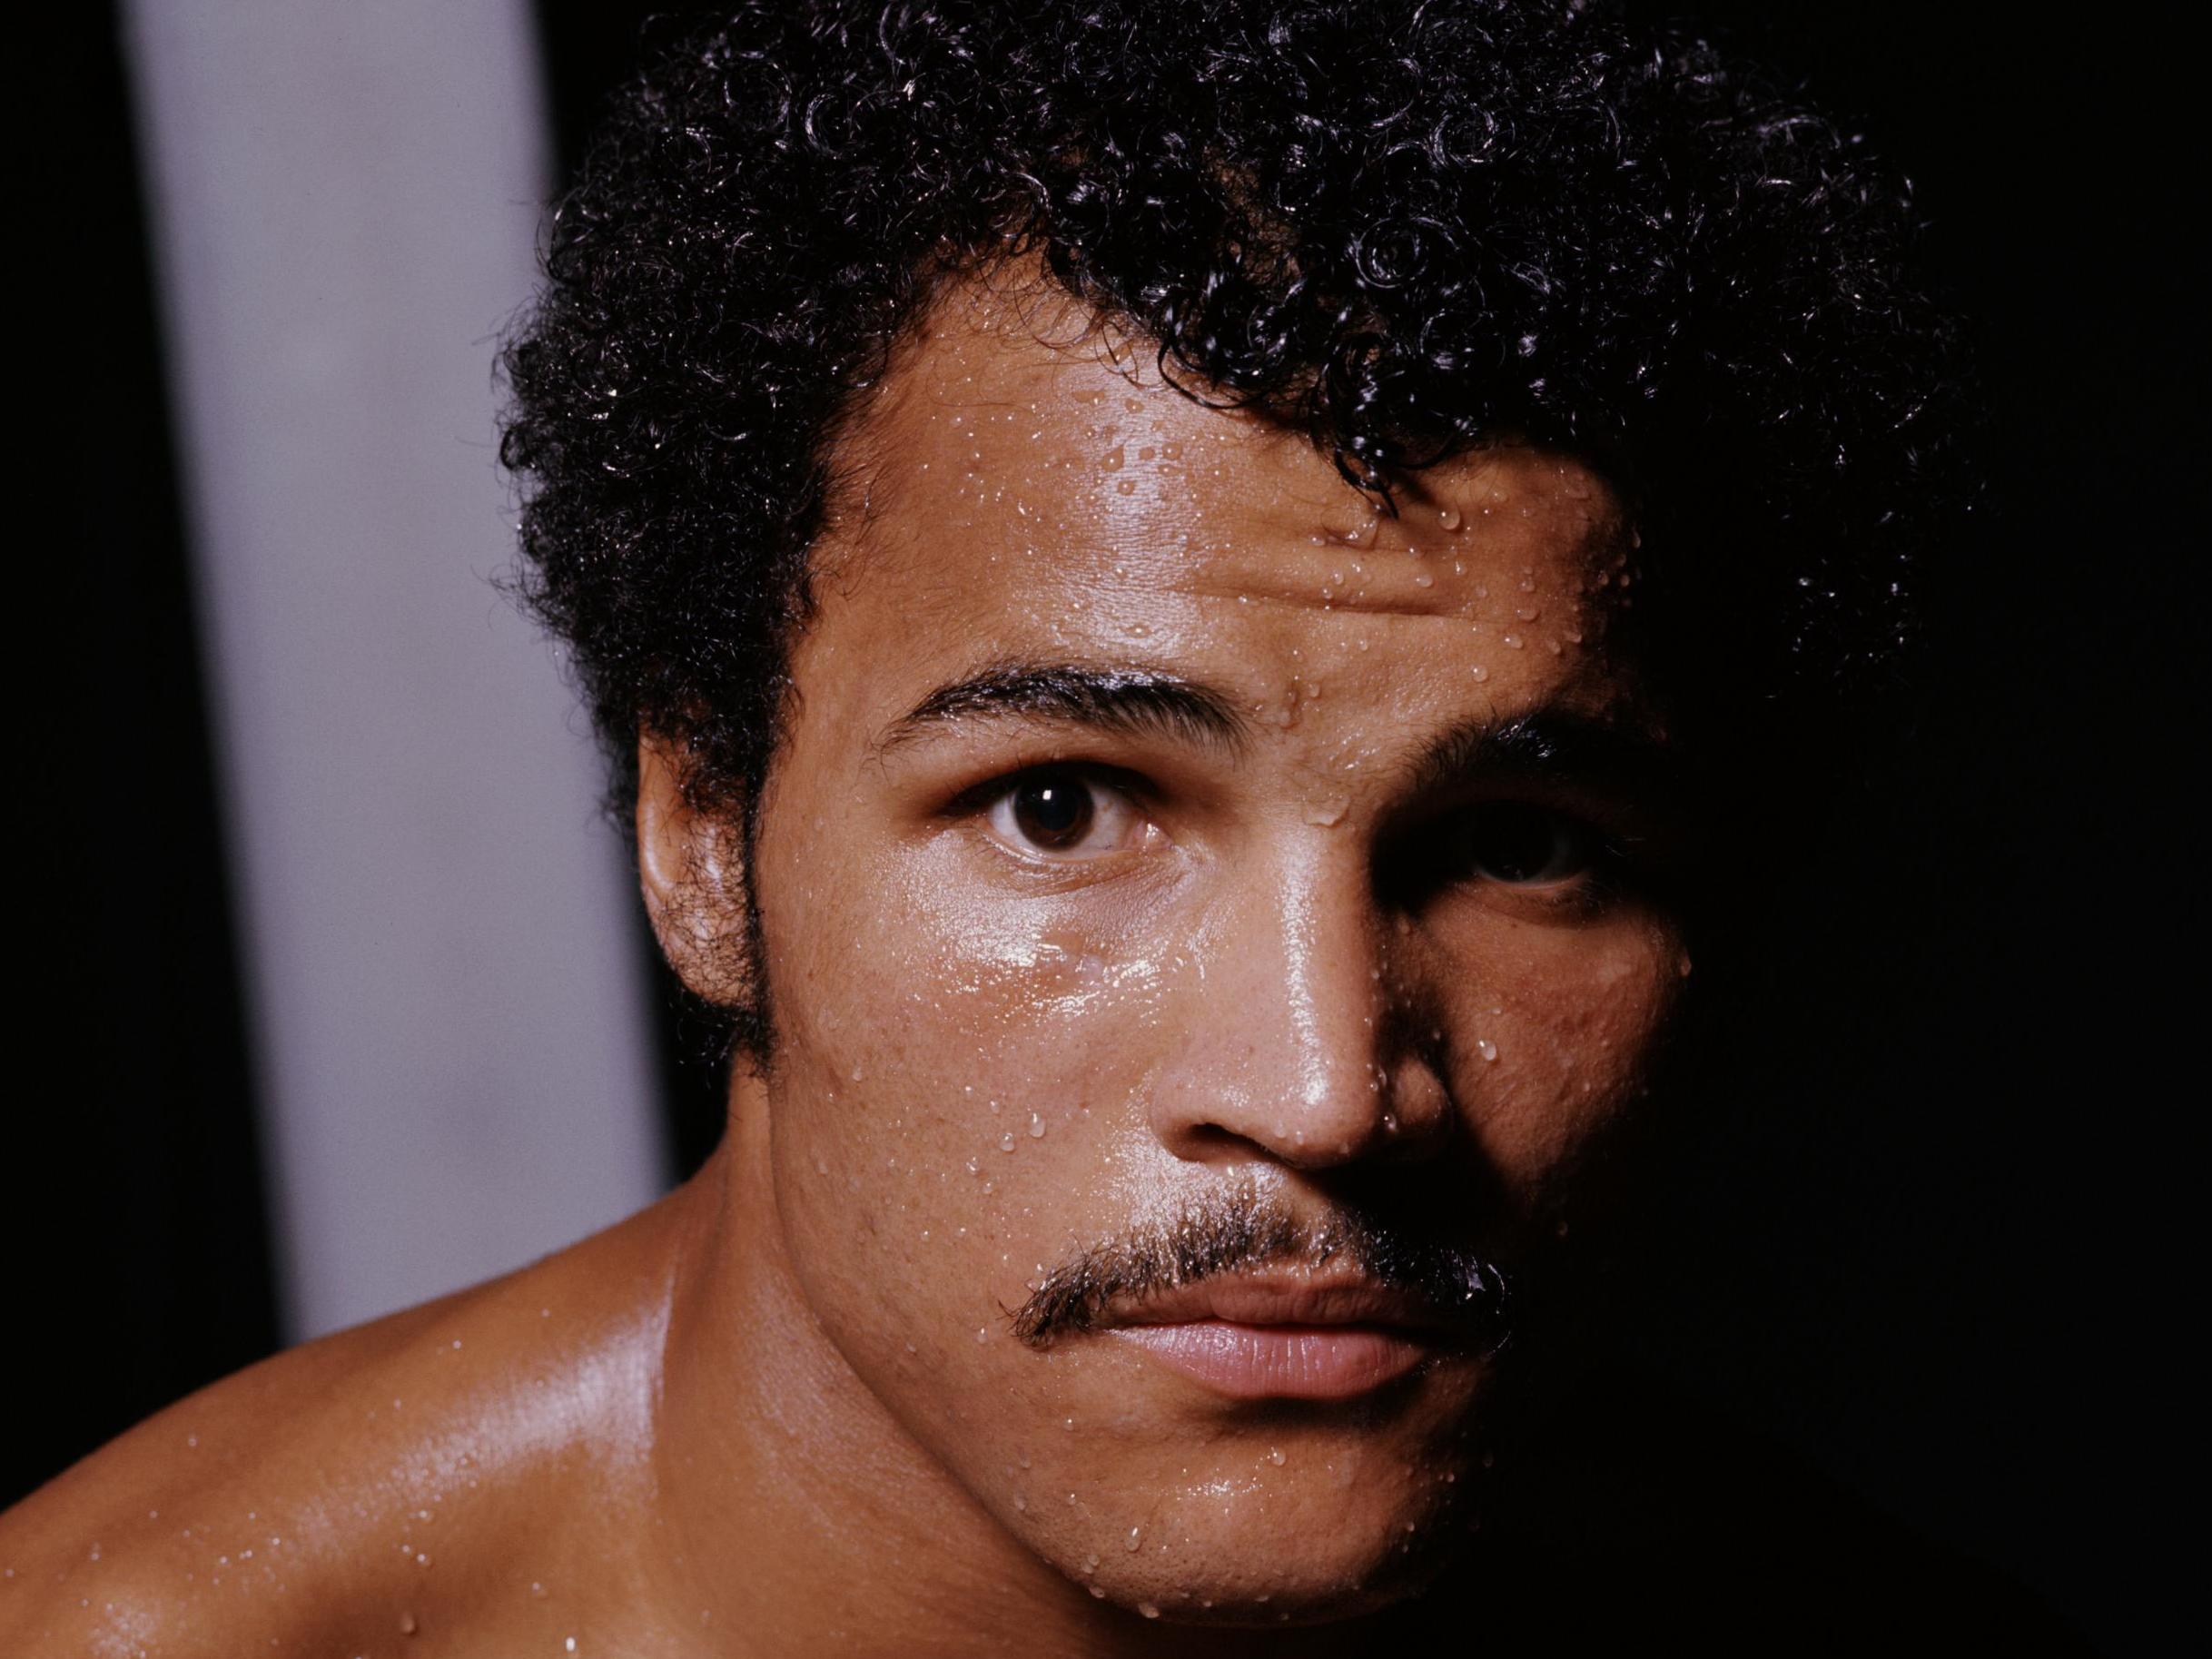 John Contehs neglected brilliance must be fondly remembered beyond the shadow of Atlantic City The Independent The Independent